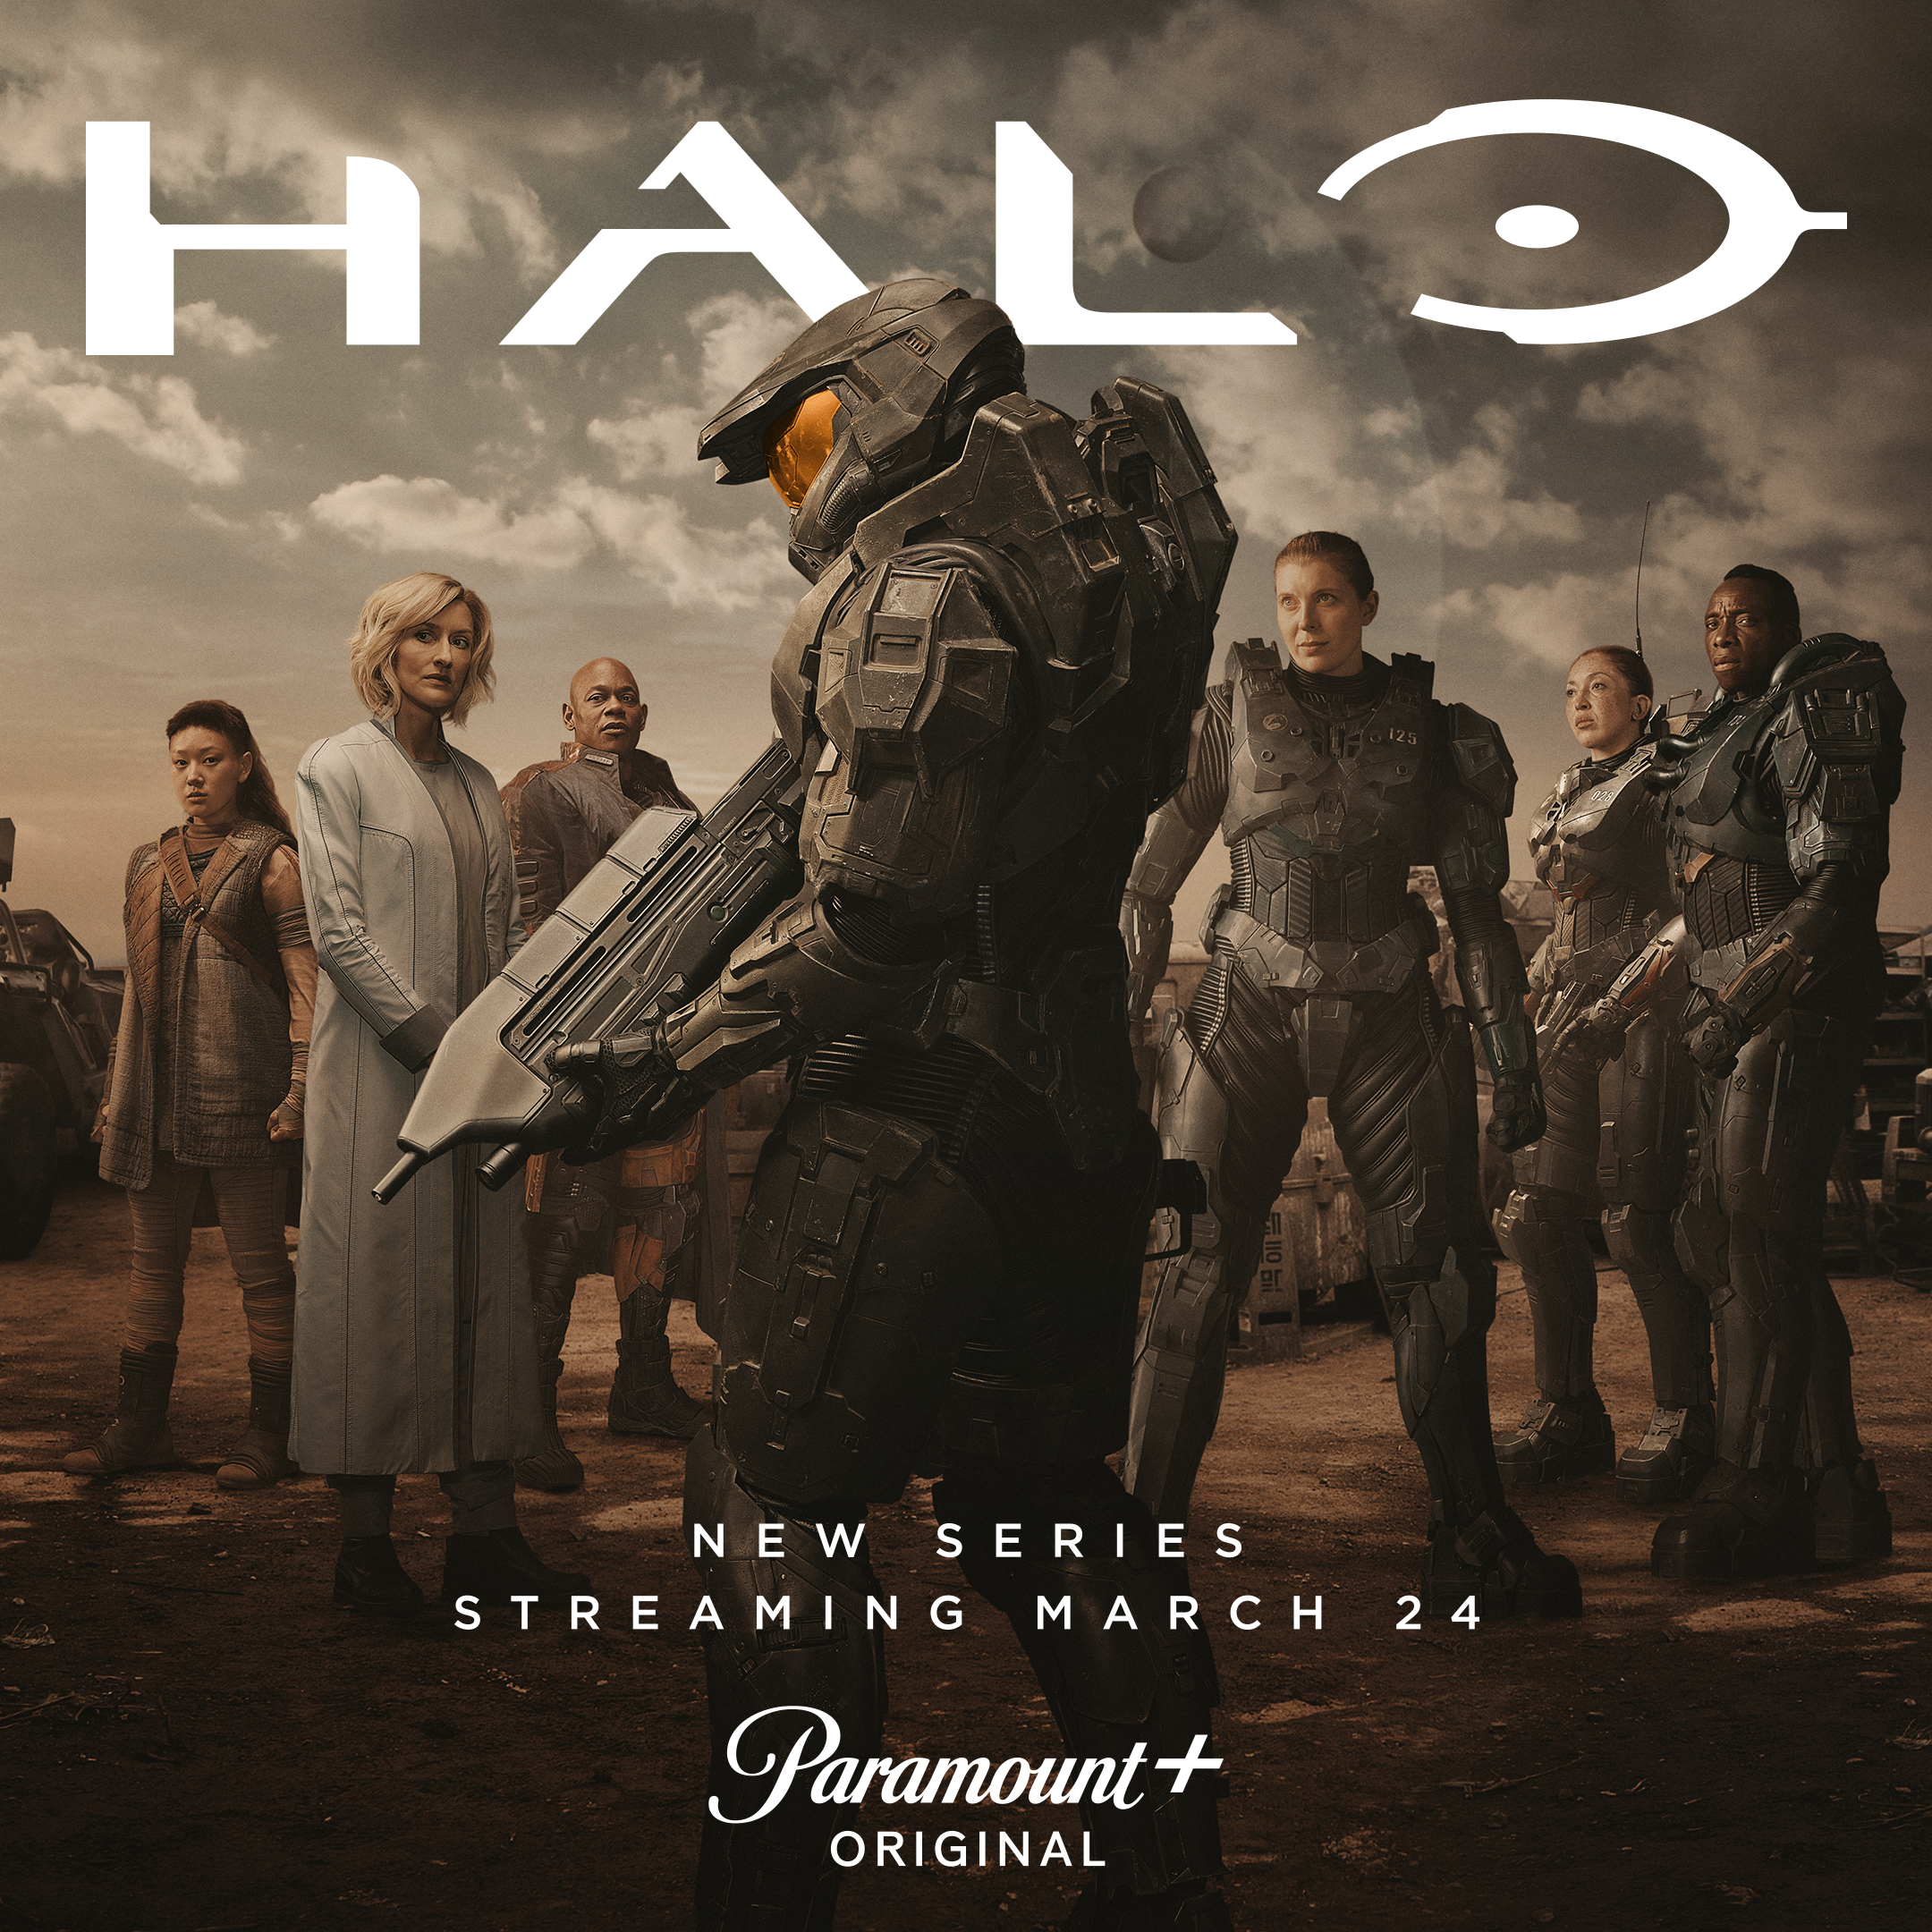 A promotional poster for Halo Season 1 shows Pablo Schreiber as Master Chief in uniform holding an MA5C assault rifle and surrounded by fellow cast members.